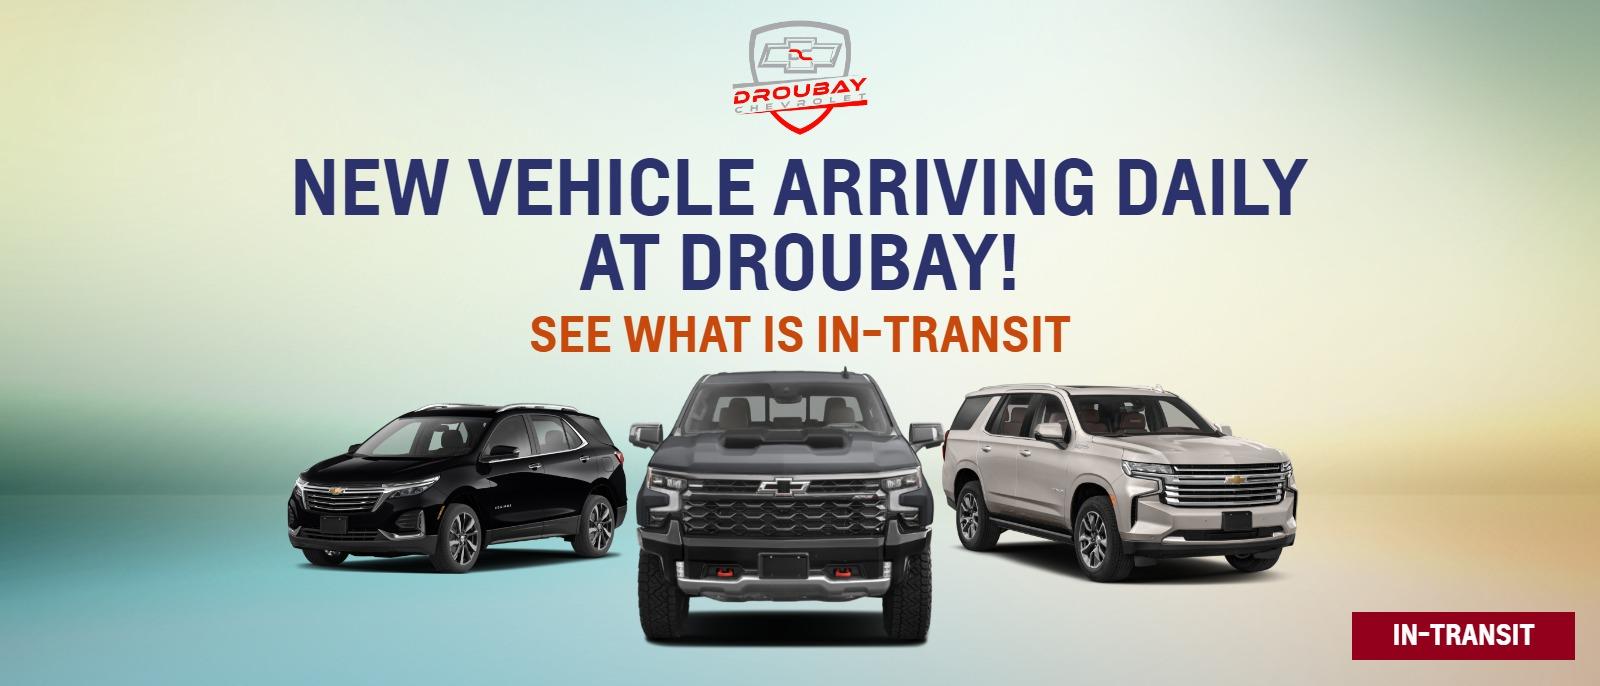 Here at Droubay Chevrolet we have new vehicles arriving daily!